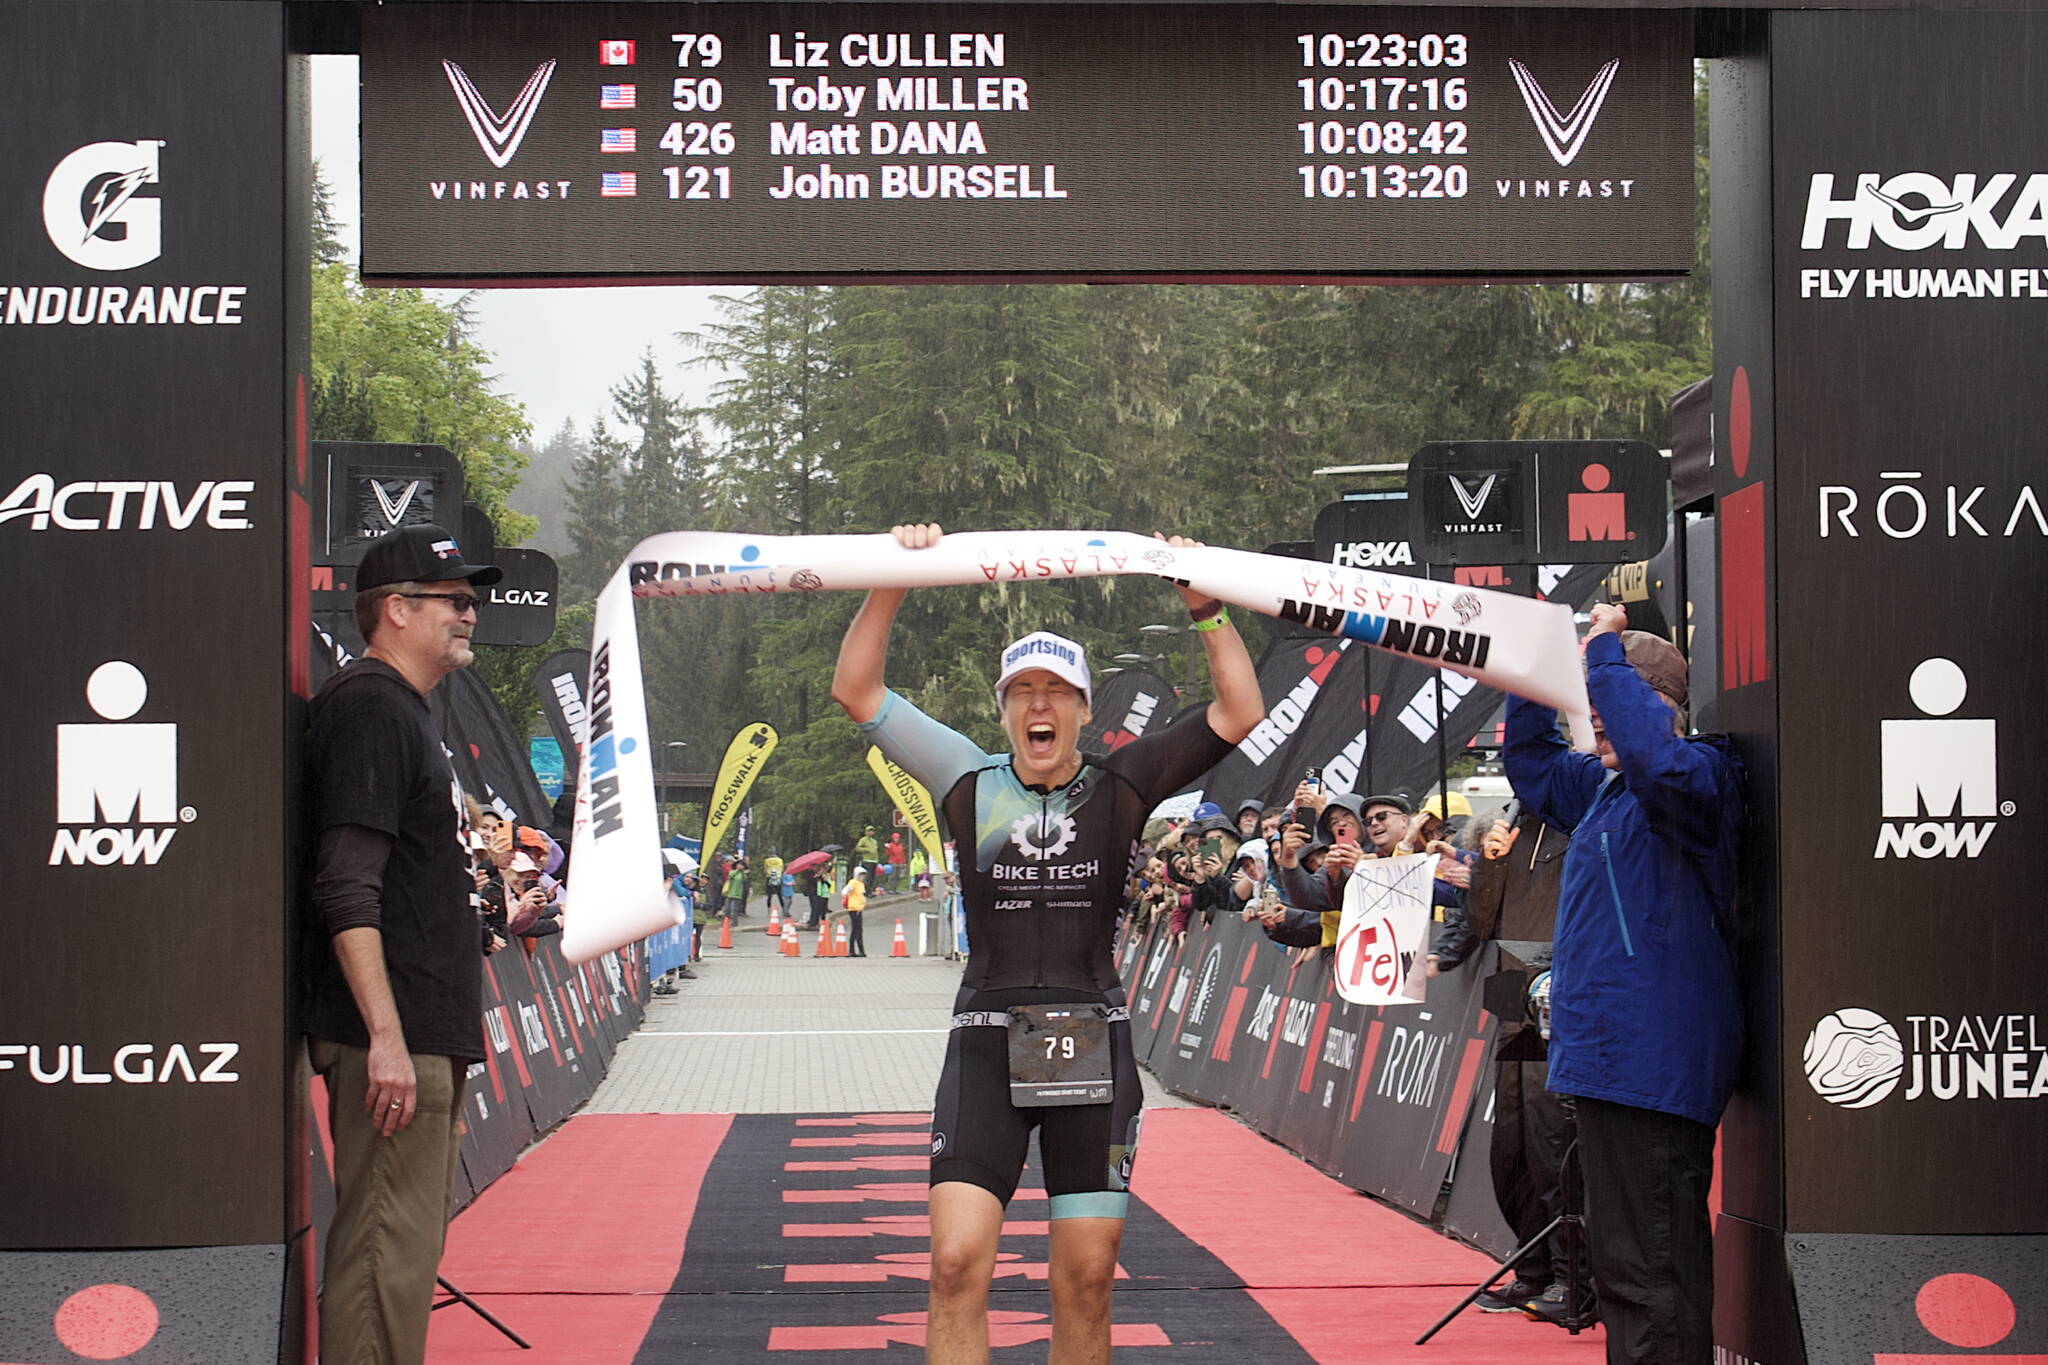 The top women’s finisher was Liz Cullen of West Vancouver with a time of 10:23:03. This is her fourth Ironman, but the first in seven years and she said the unique first-time location was part of the lure. (Mark Sabbatini / Juneau Empire)